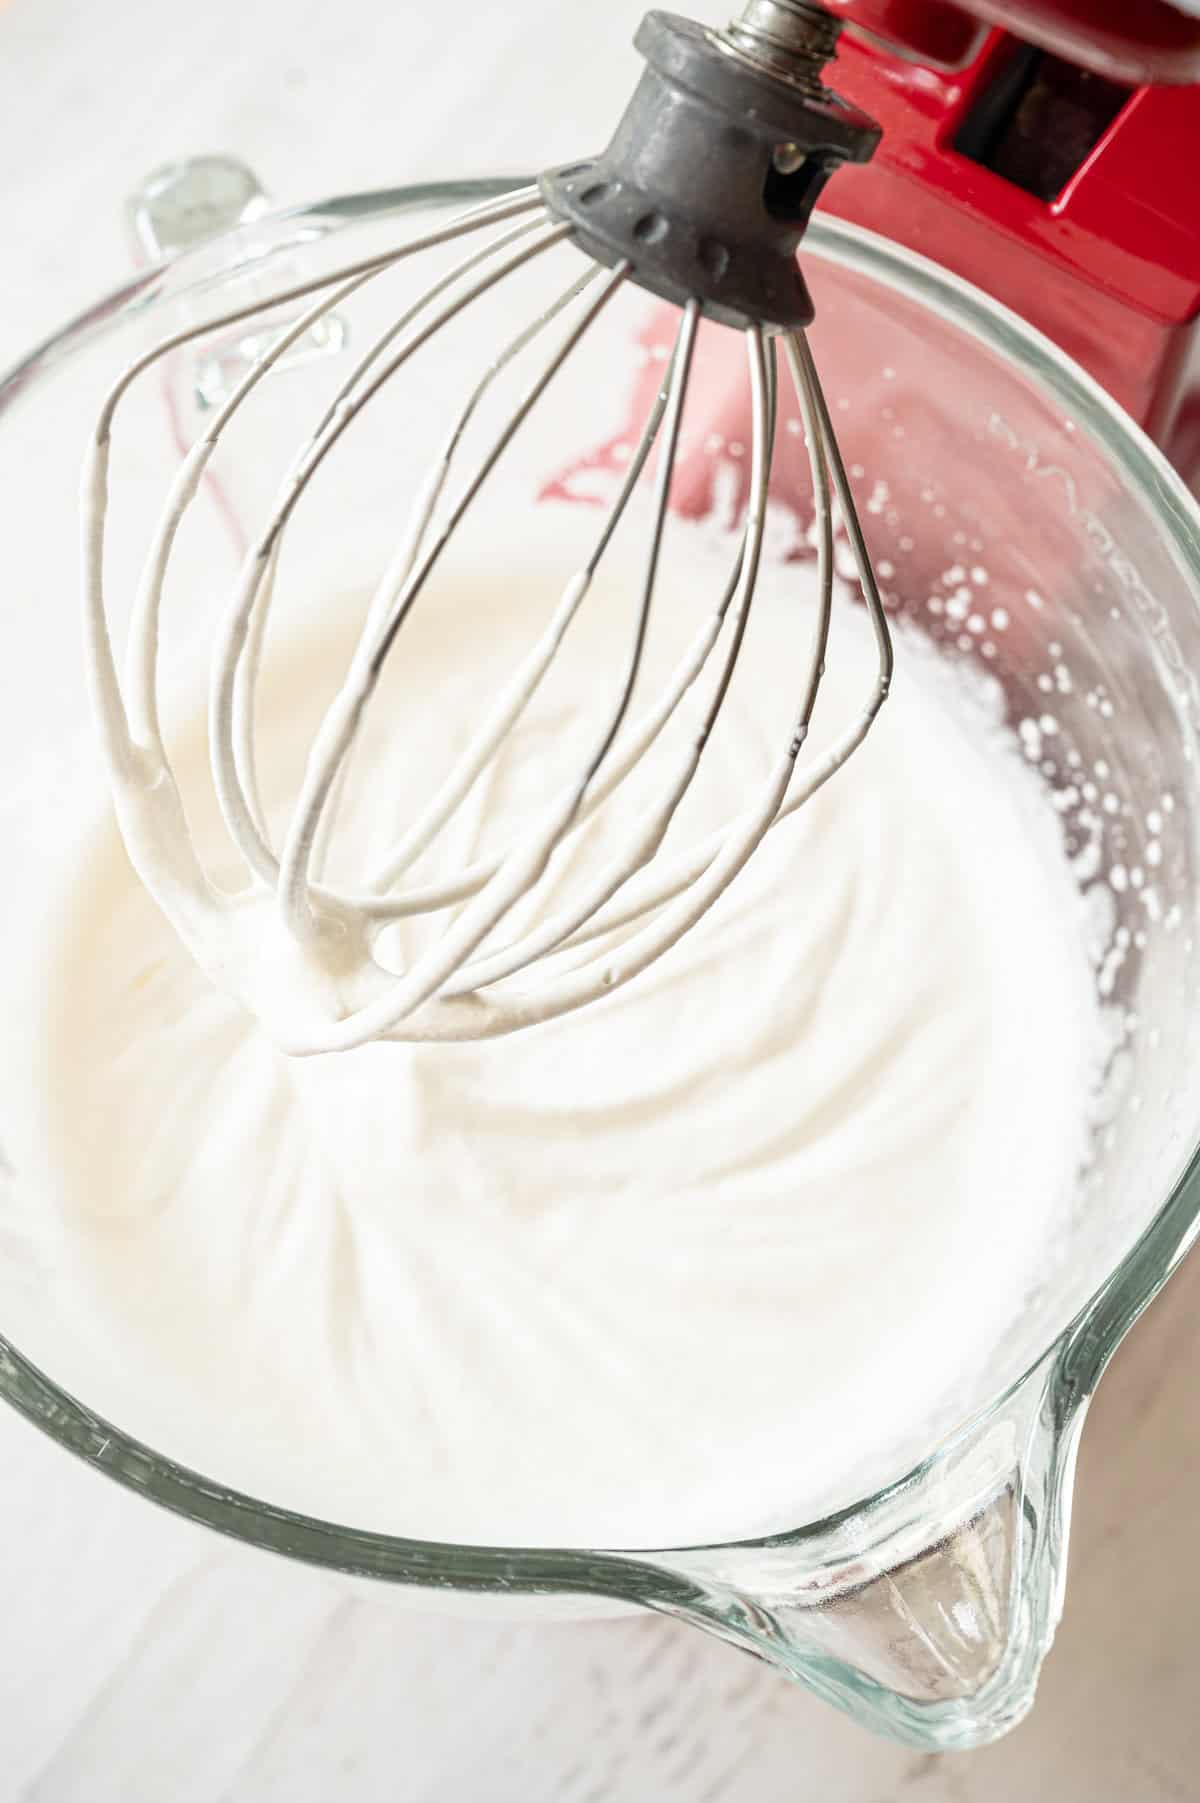 The beater of a mixer above a glass mixing bowl with fresh whipped cream.